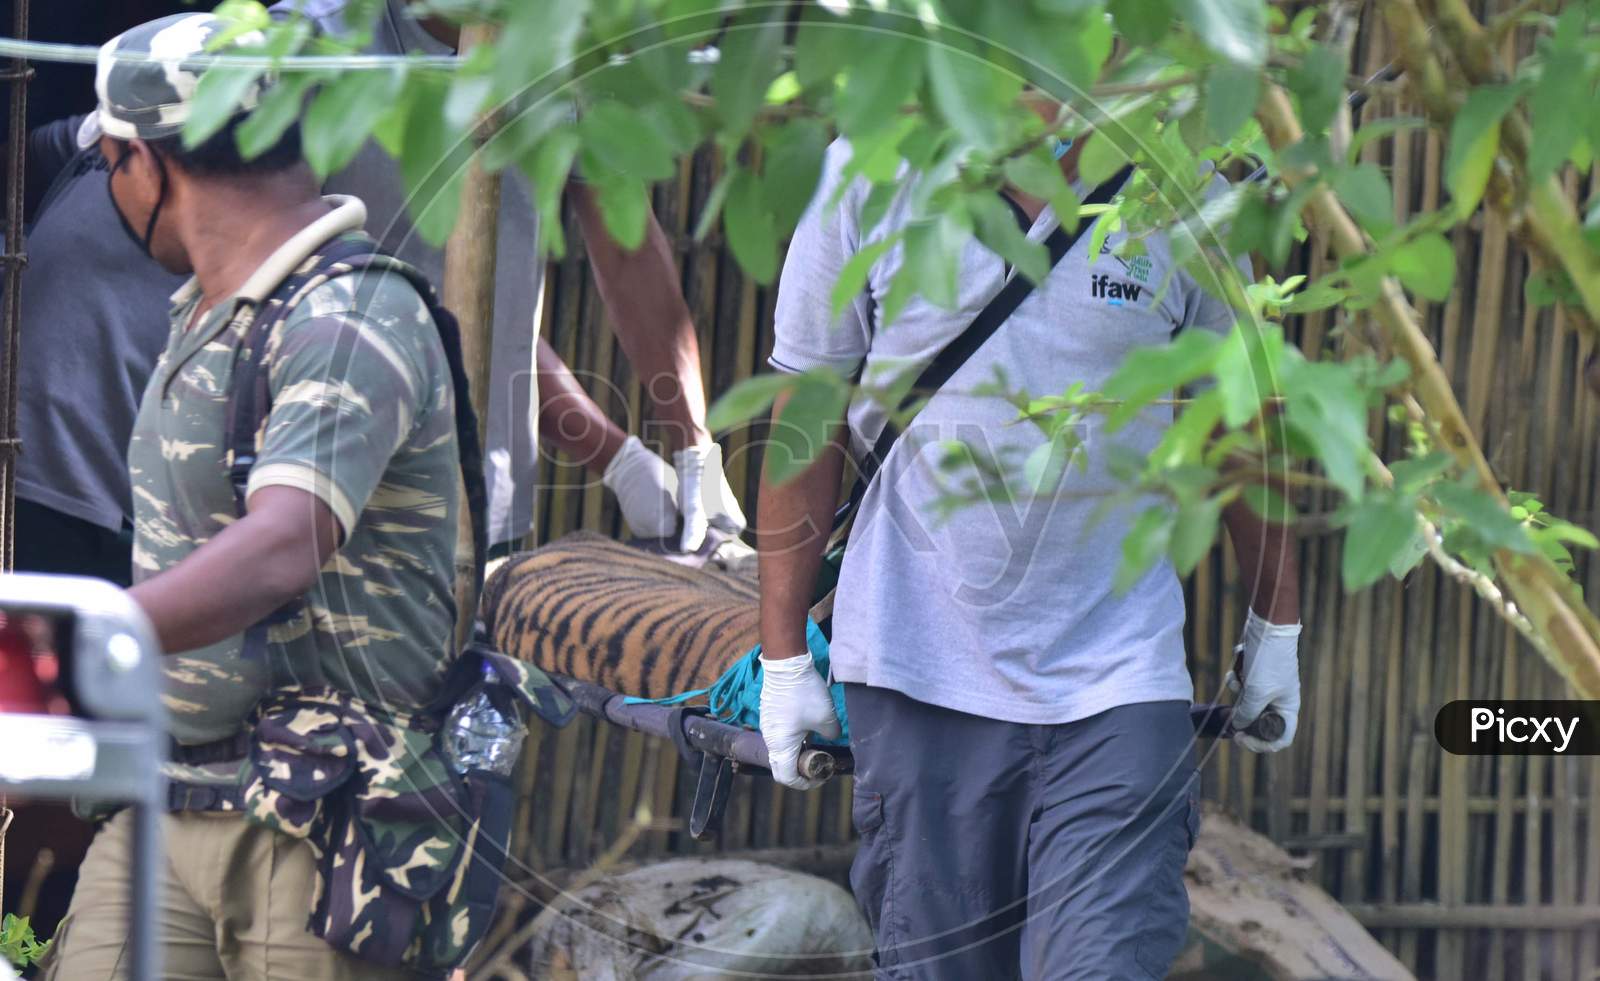 Forest officials carry a tranquilized tigress that strayed into a house in Nagaon, Assam on July 15, 2020.